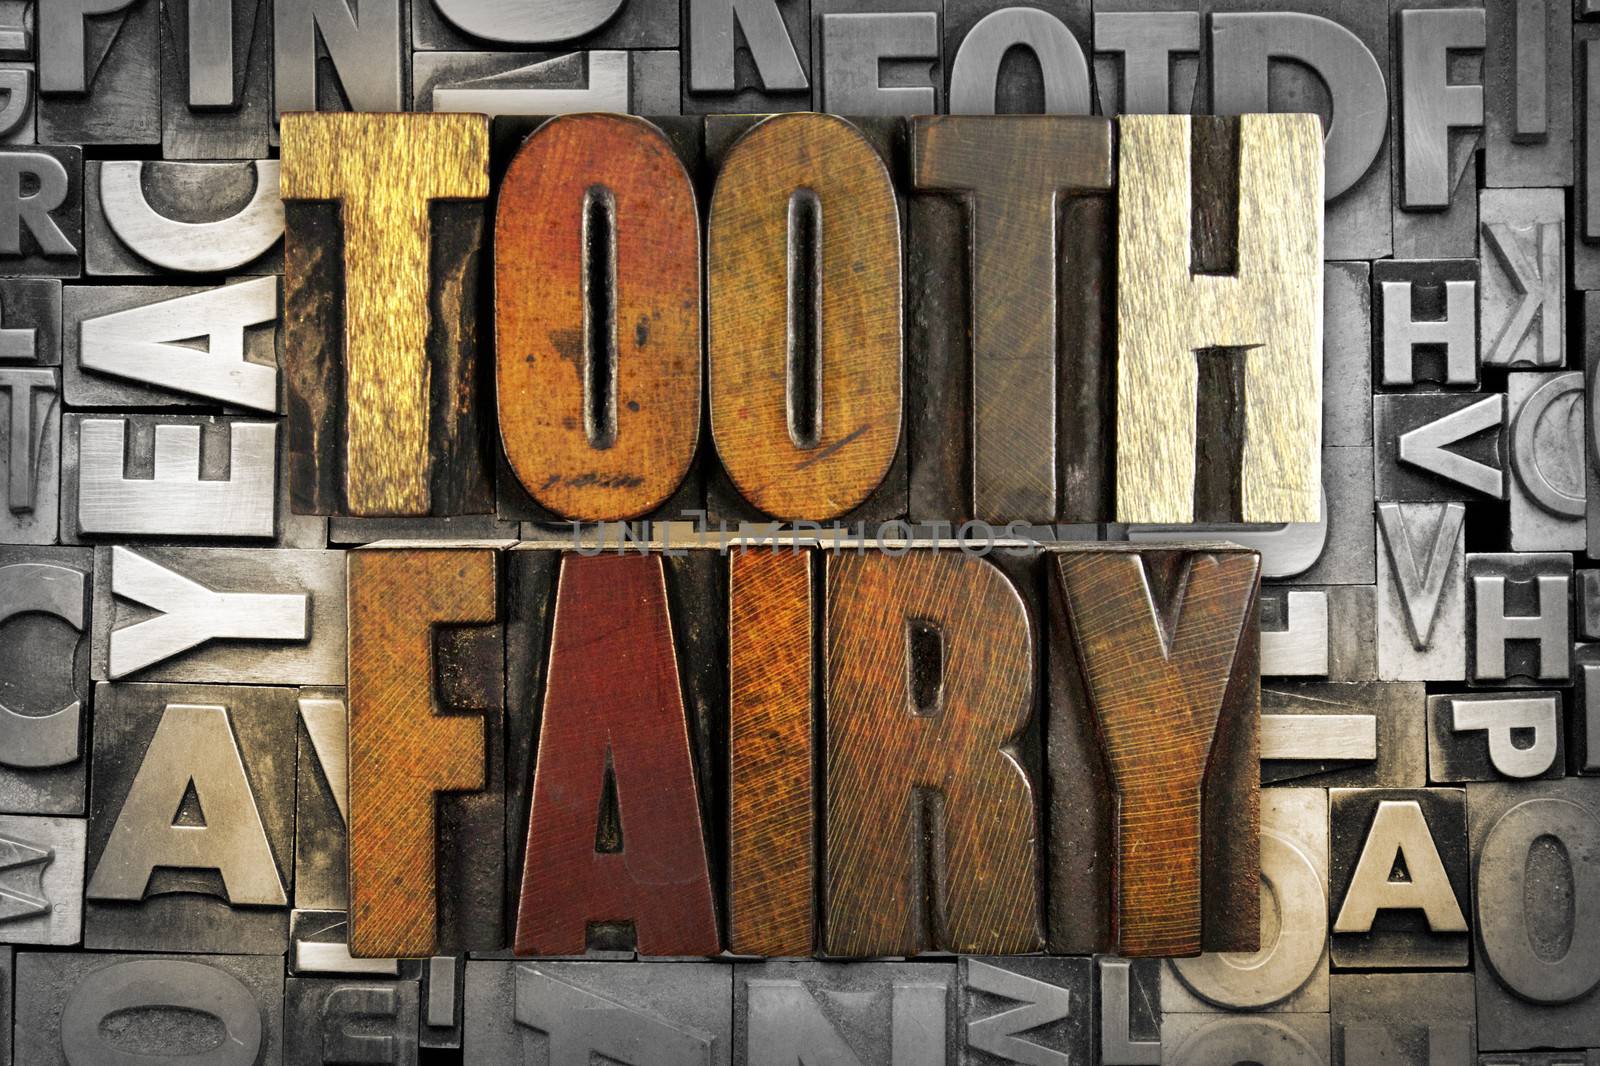 Tooth Fairy by enterlinedesign